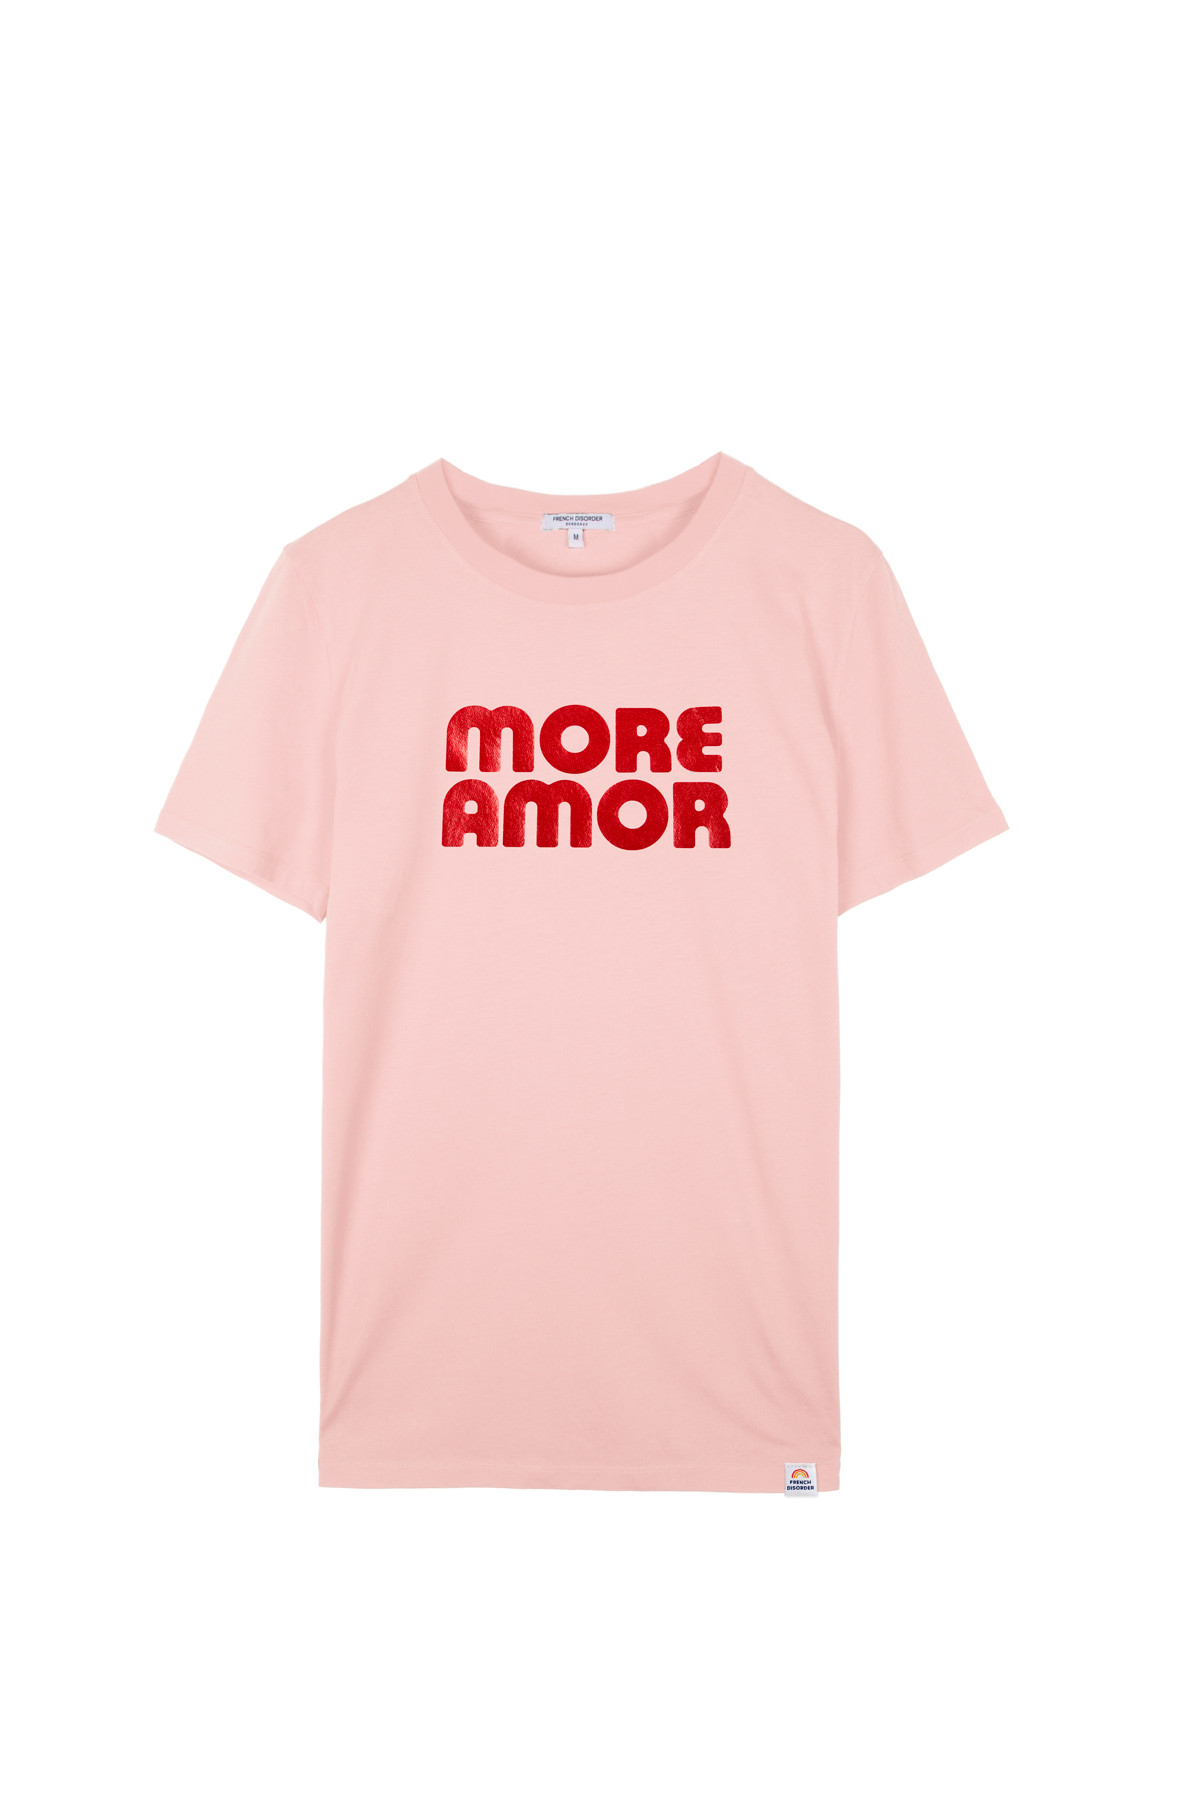 Photo de T-SHIRTS COL ROND Tshirt MORE AMOR chez French Disorder